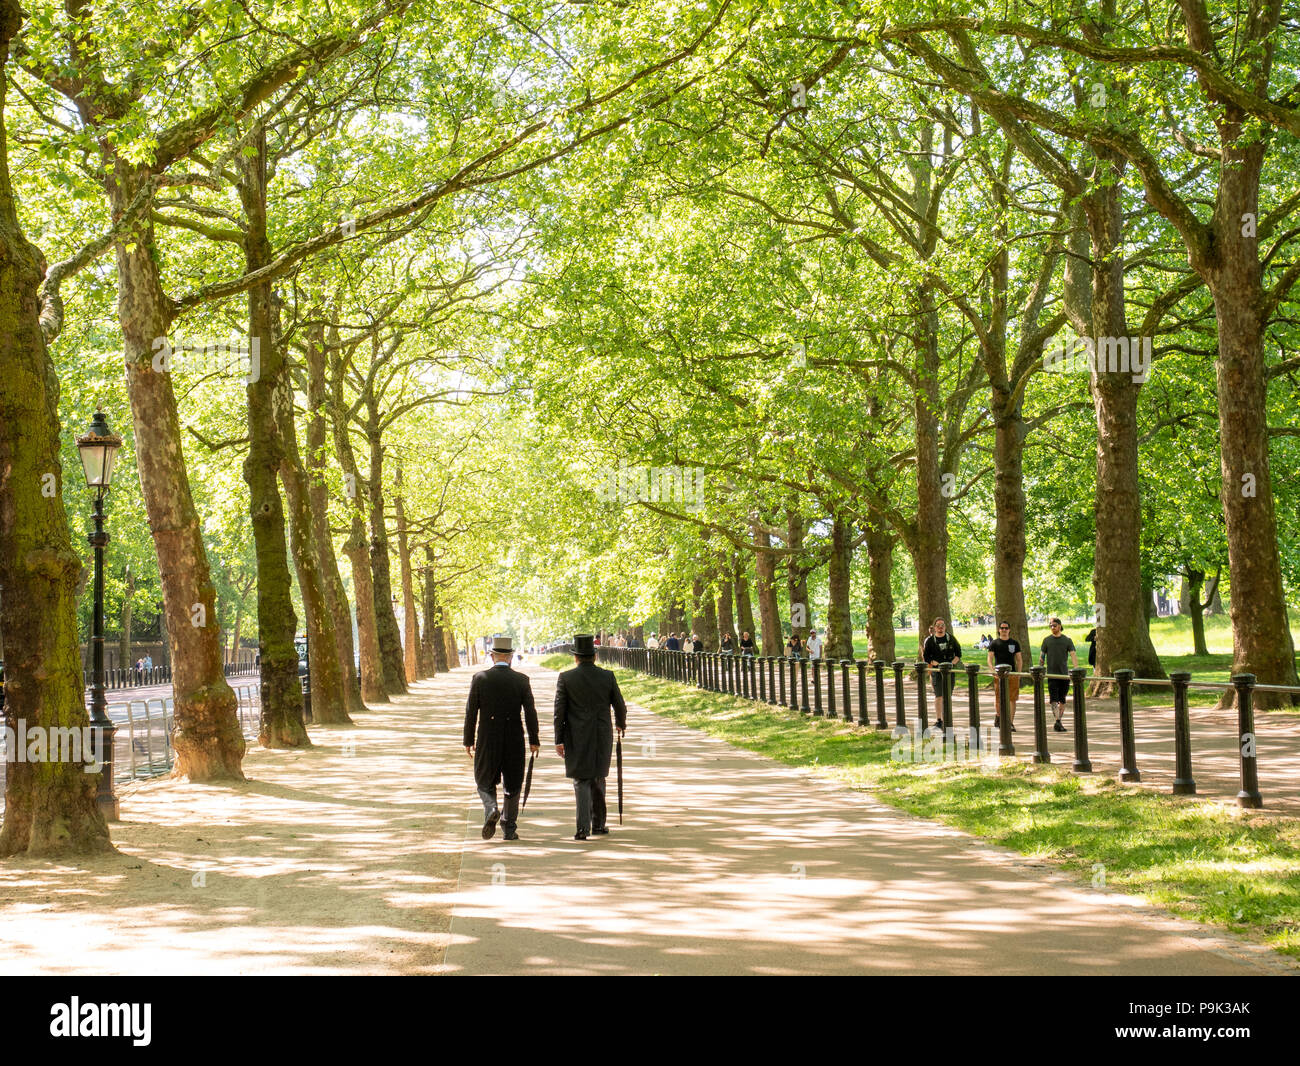 Men in morning suit and top hats strolling down Constitution Hill alongside Green Park, London, UK Stock Photo